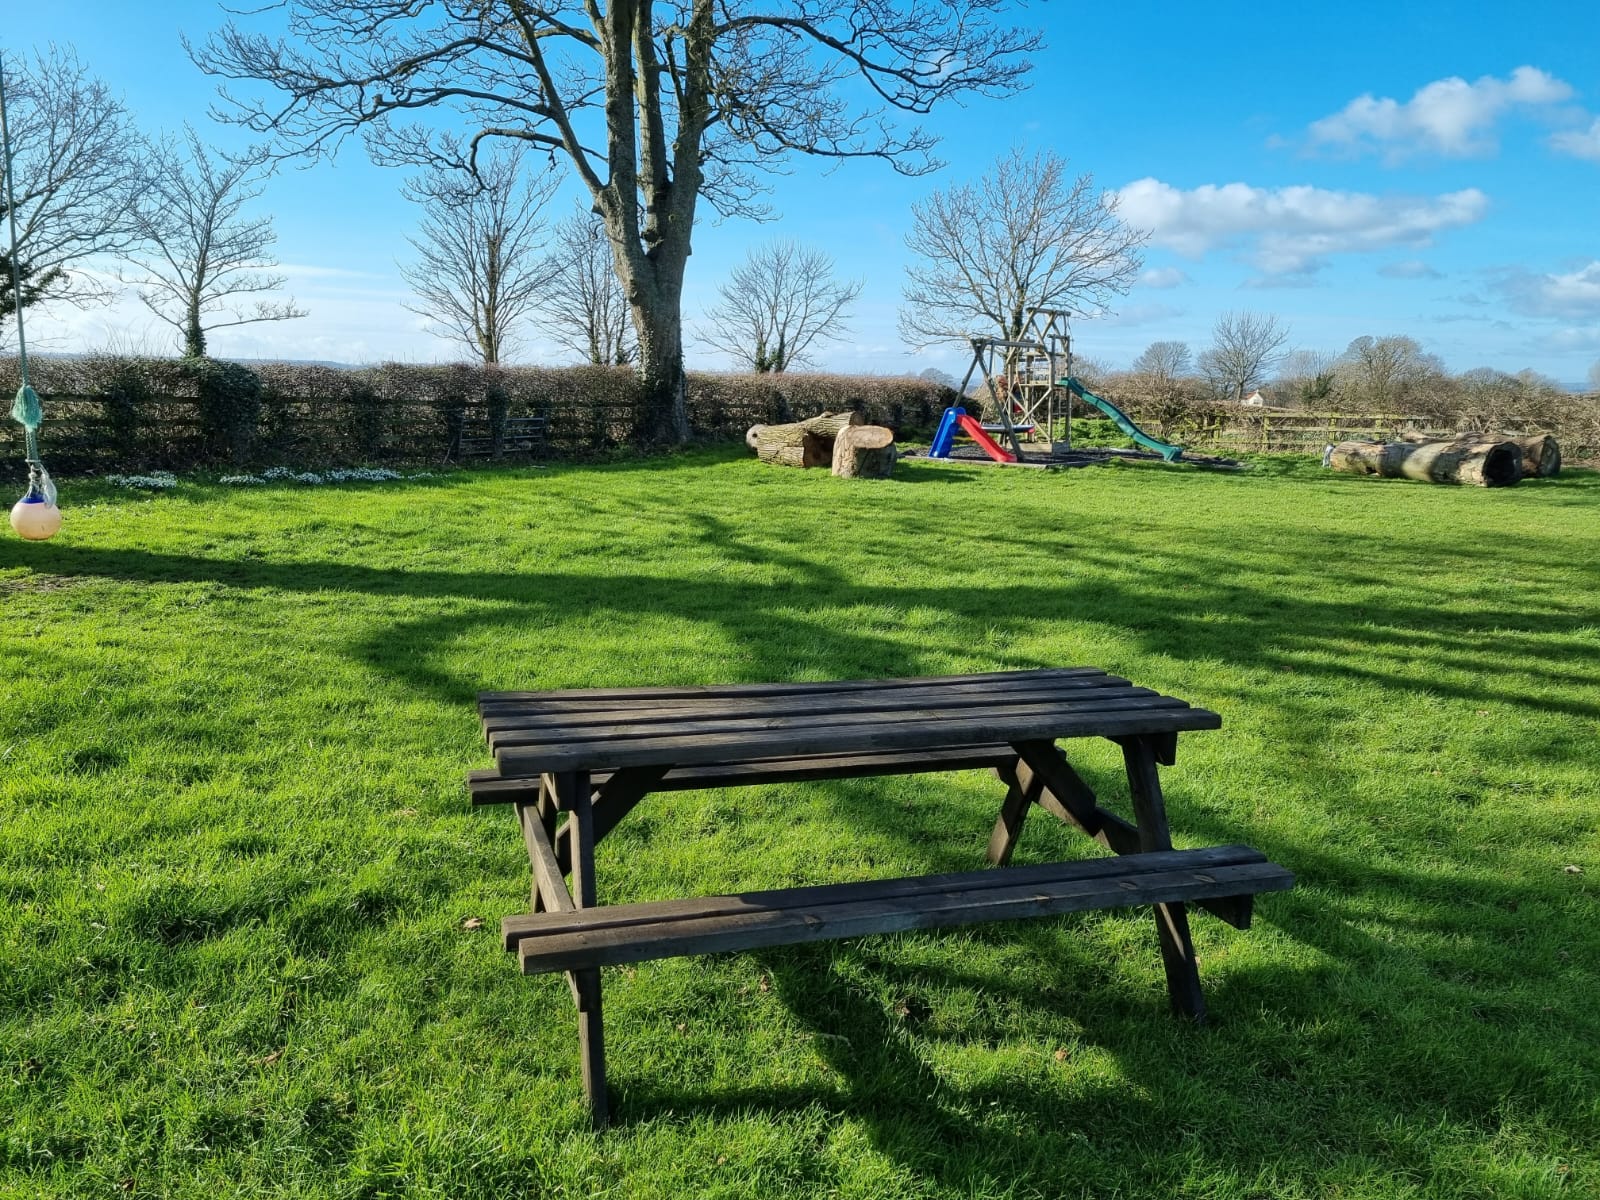 childrens play area with a bench in the foreground